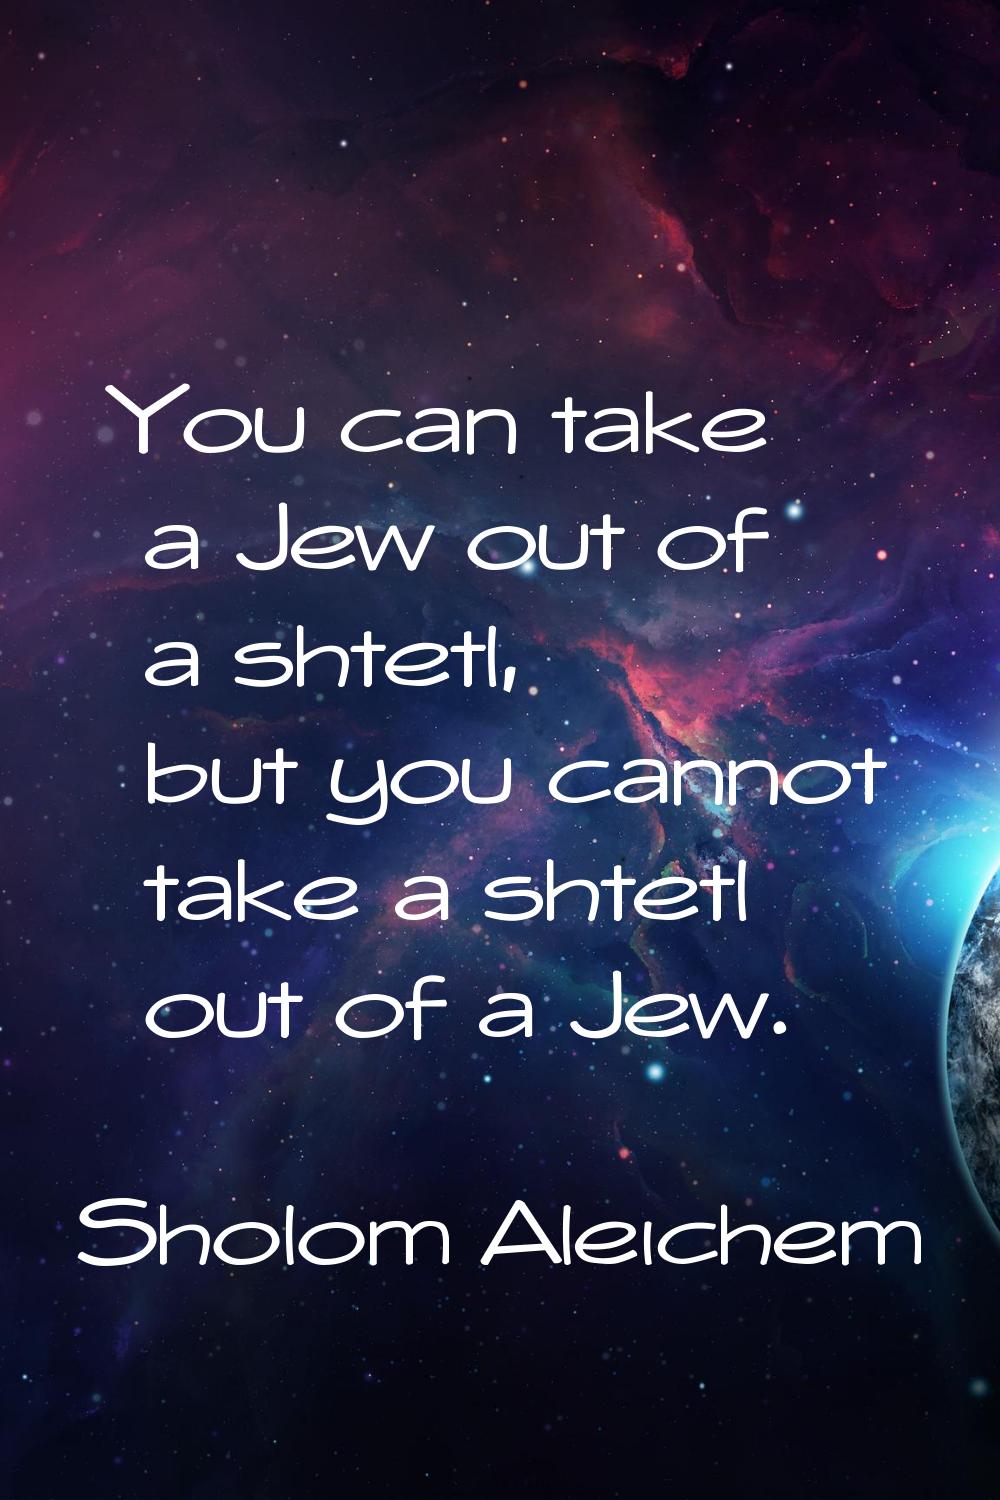 You can take a Jew out of a shtetl, but you cannot take a shtetl out of a Jew.